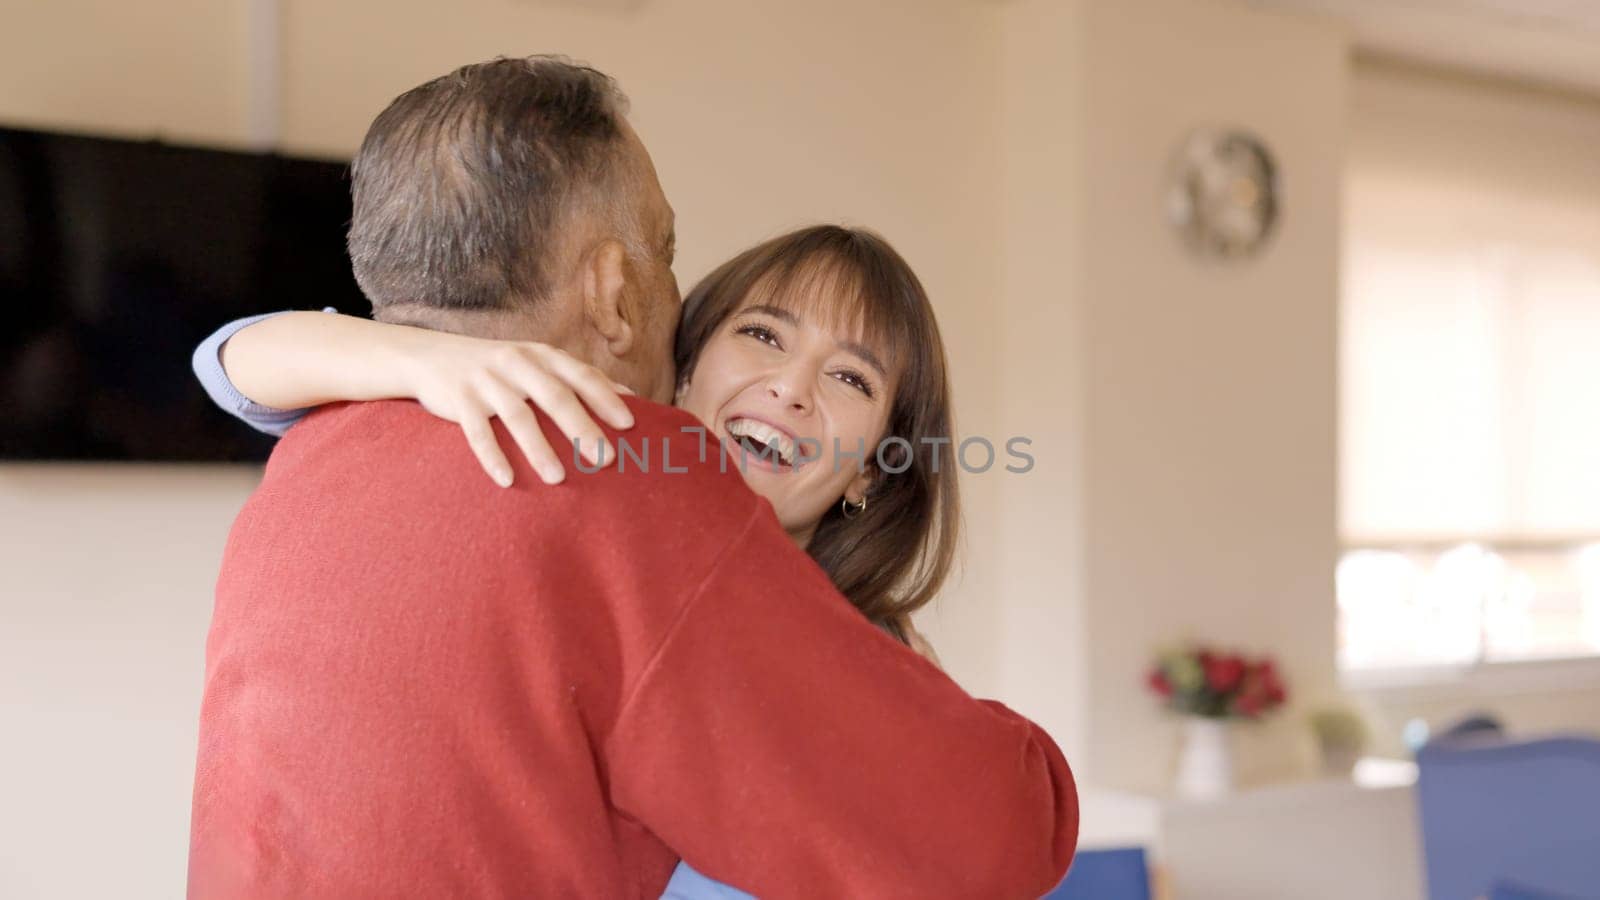 An adult granddaughter embracing her grandfather visiting him in a geriatric